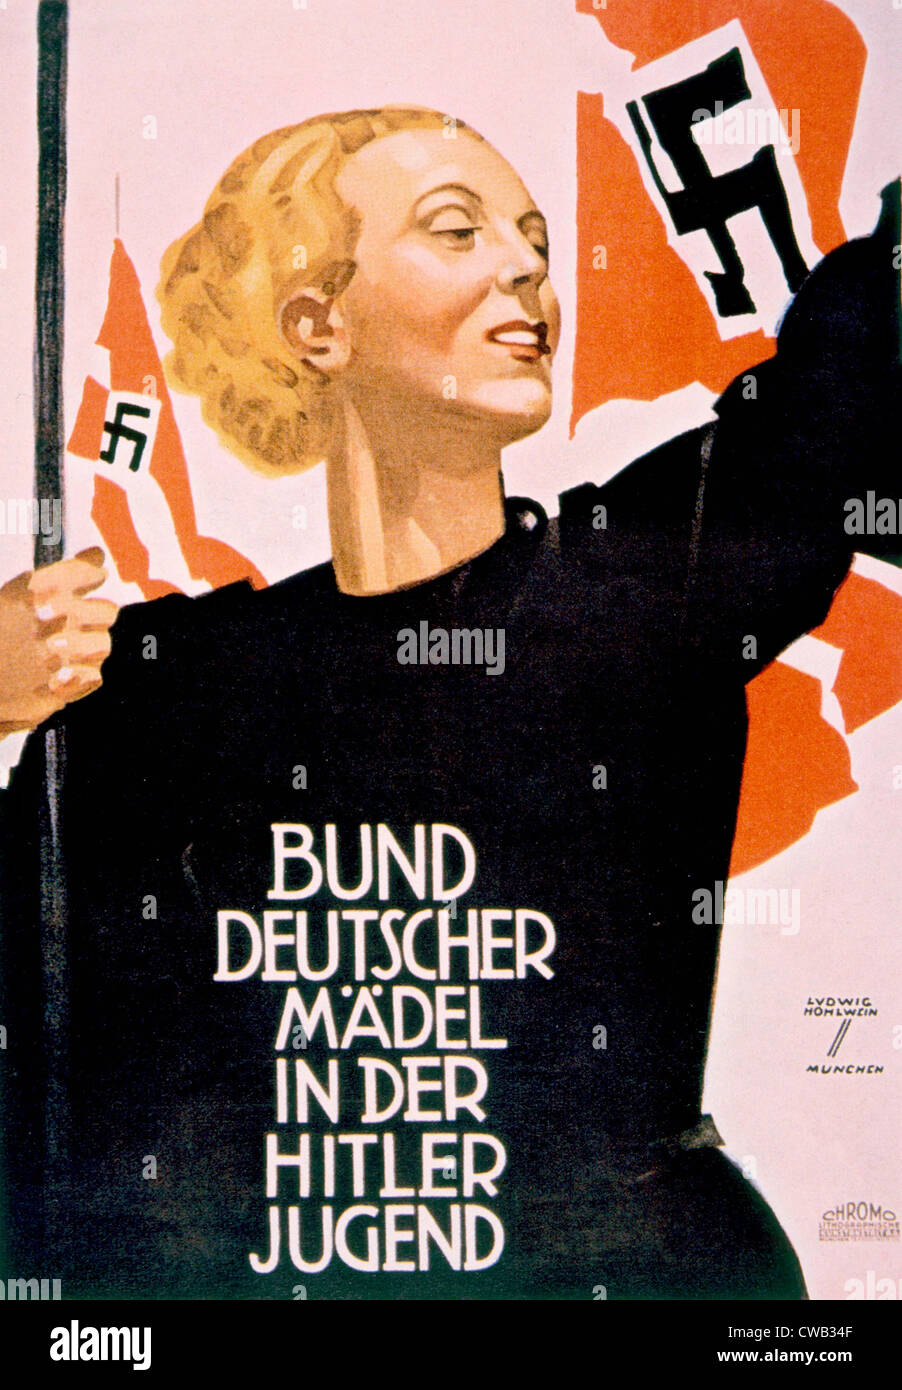 The League of German Girls in the Hitler Youth, German poster, ca. 1936 Stock Photo